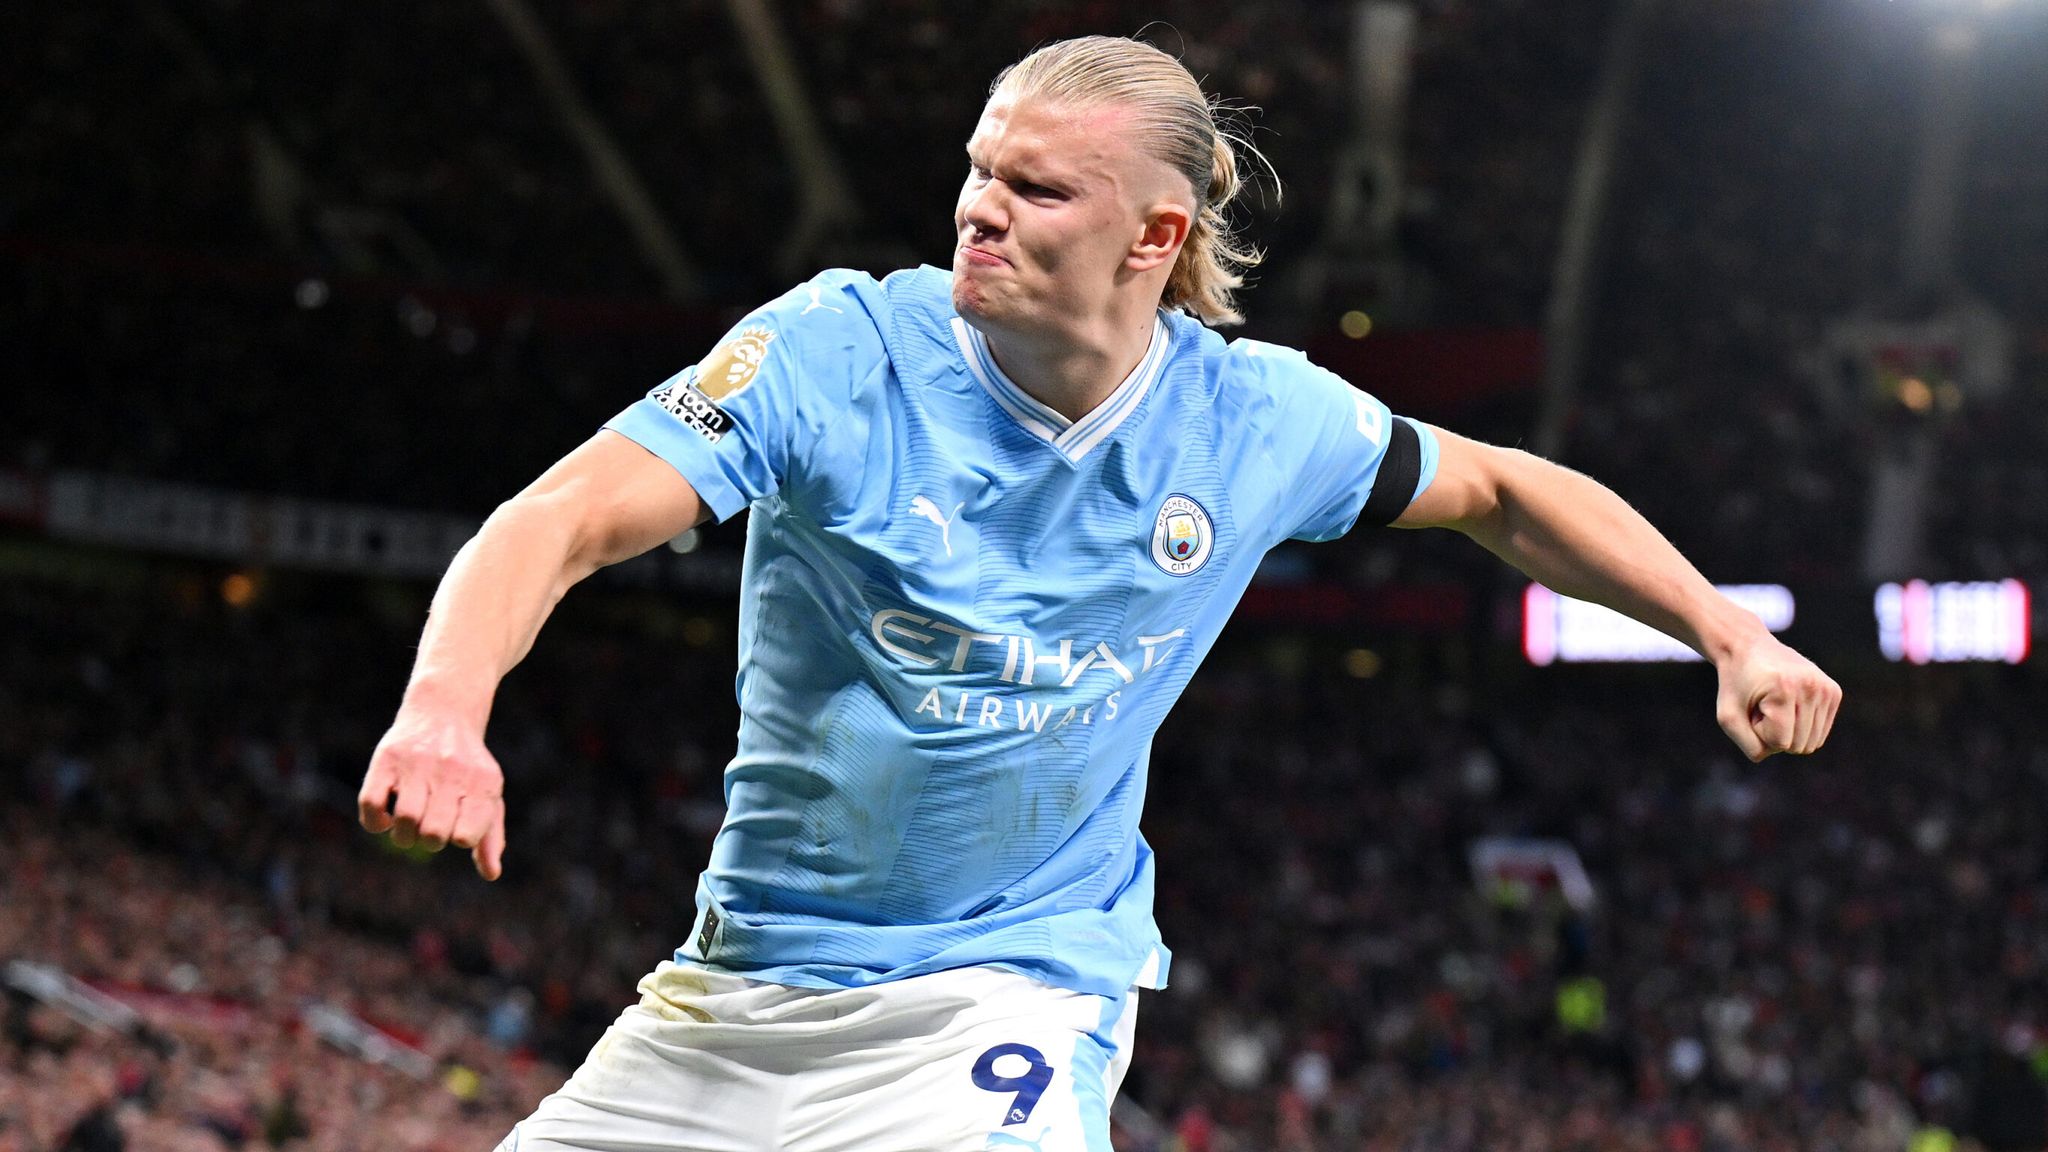 Erling Haaland silences haters as Man City beat broken Man Utd on derby day - Premier League hits and misses | Football News | Sky Sports